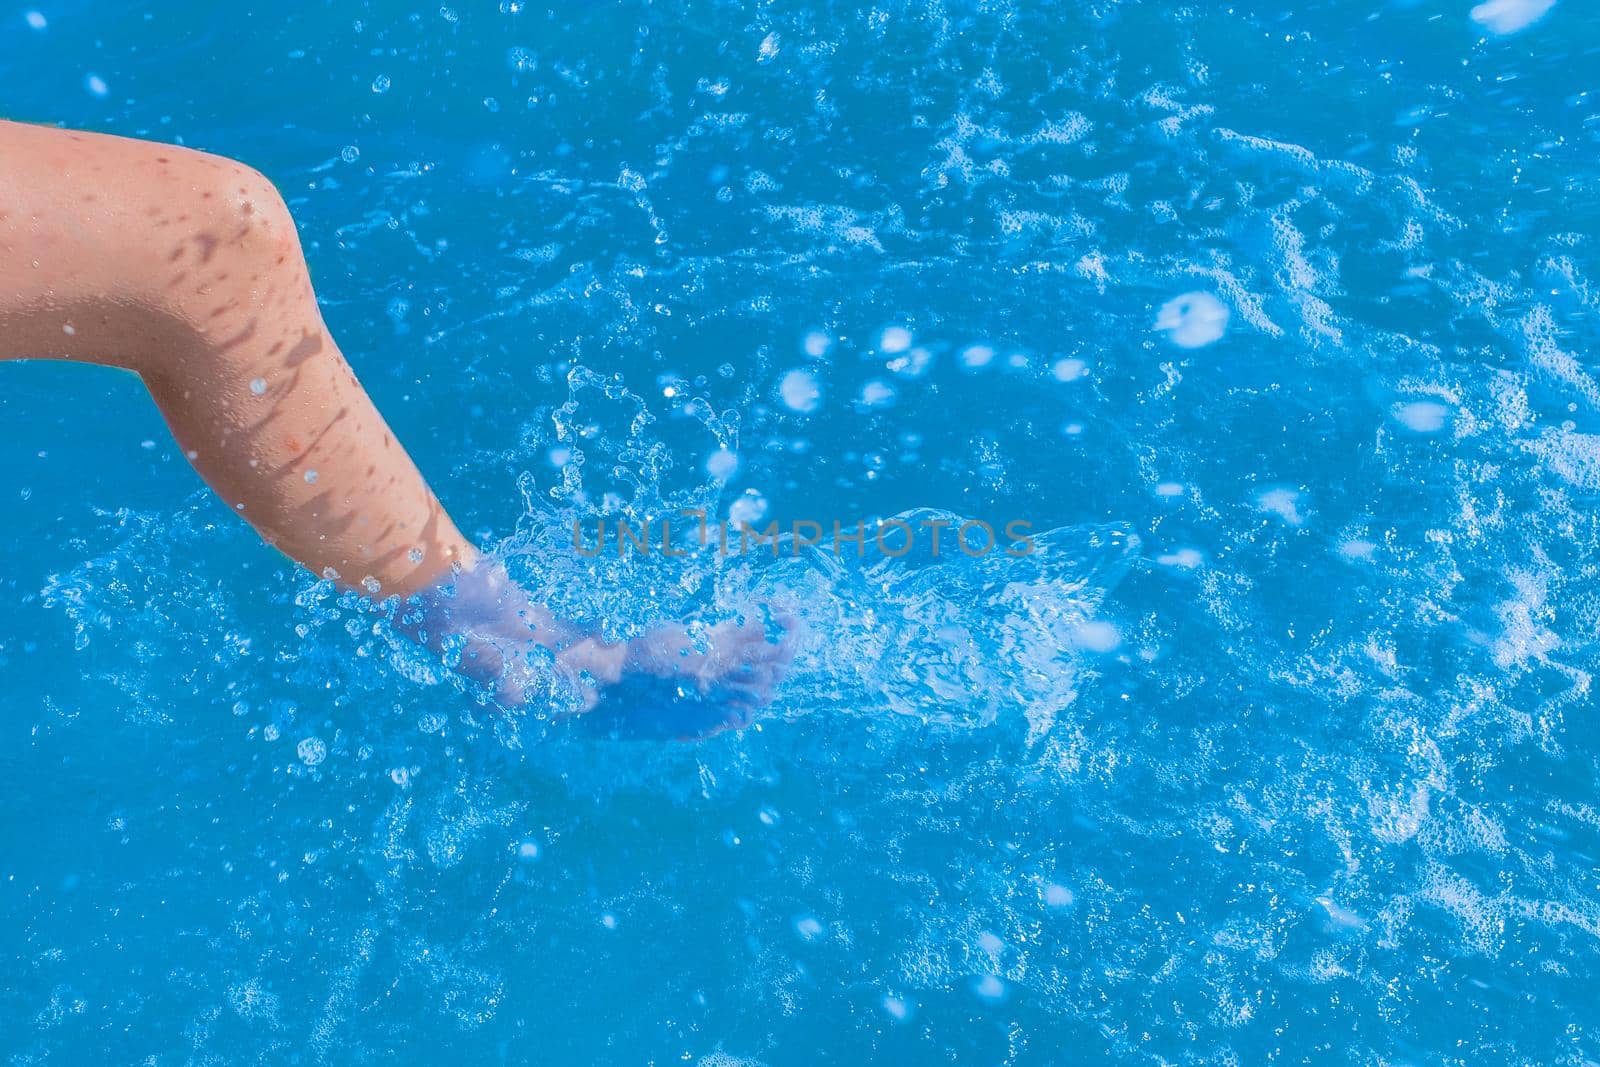 A young girl's leg sprays blue light sea water close-up.